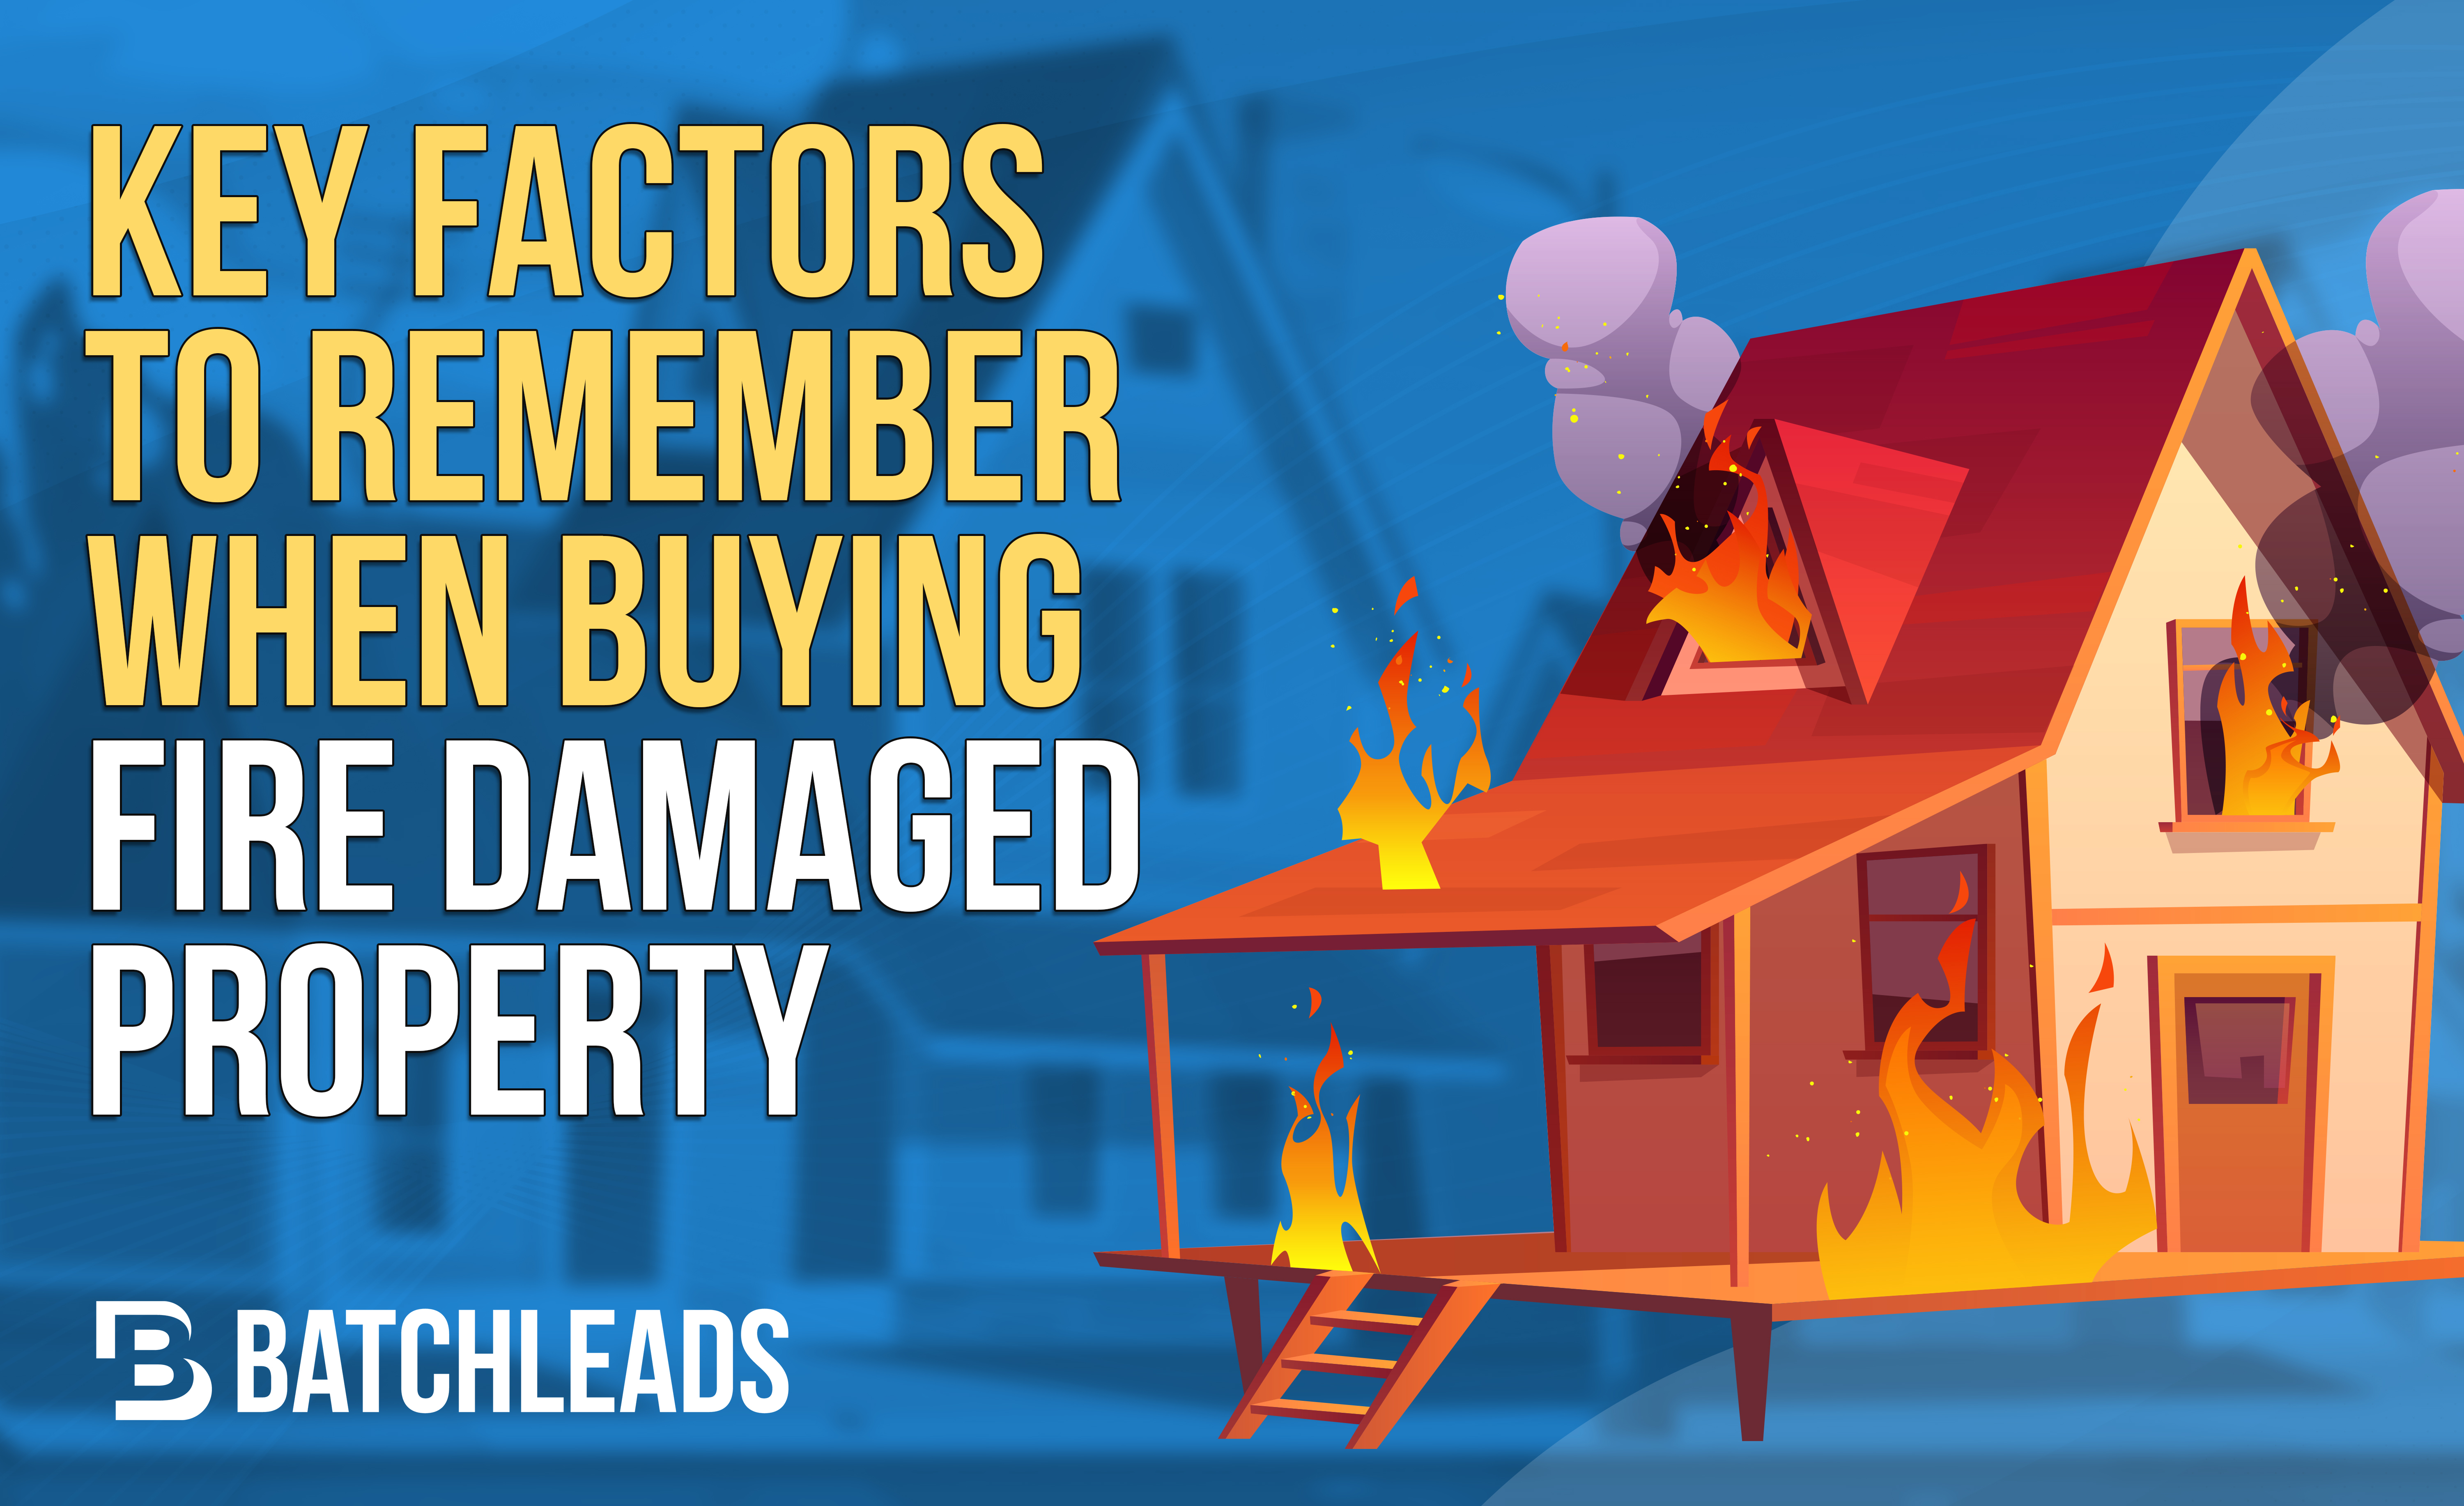 Key Factors to Remember When Buying Fire Damaged Property